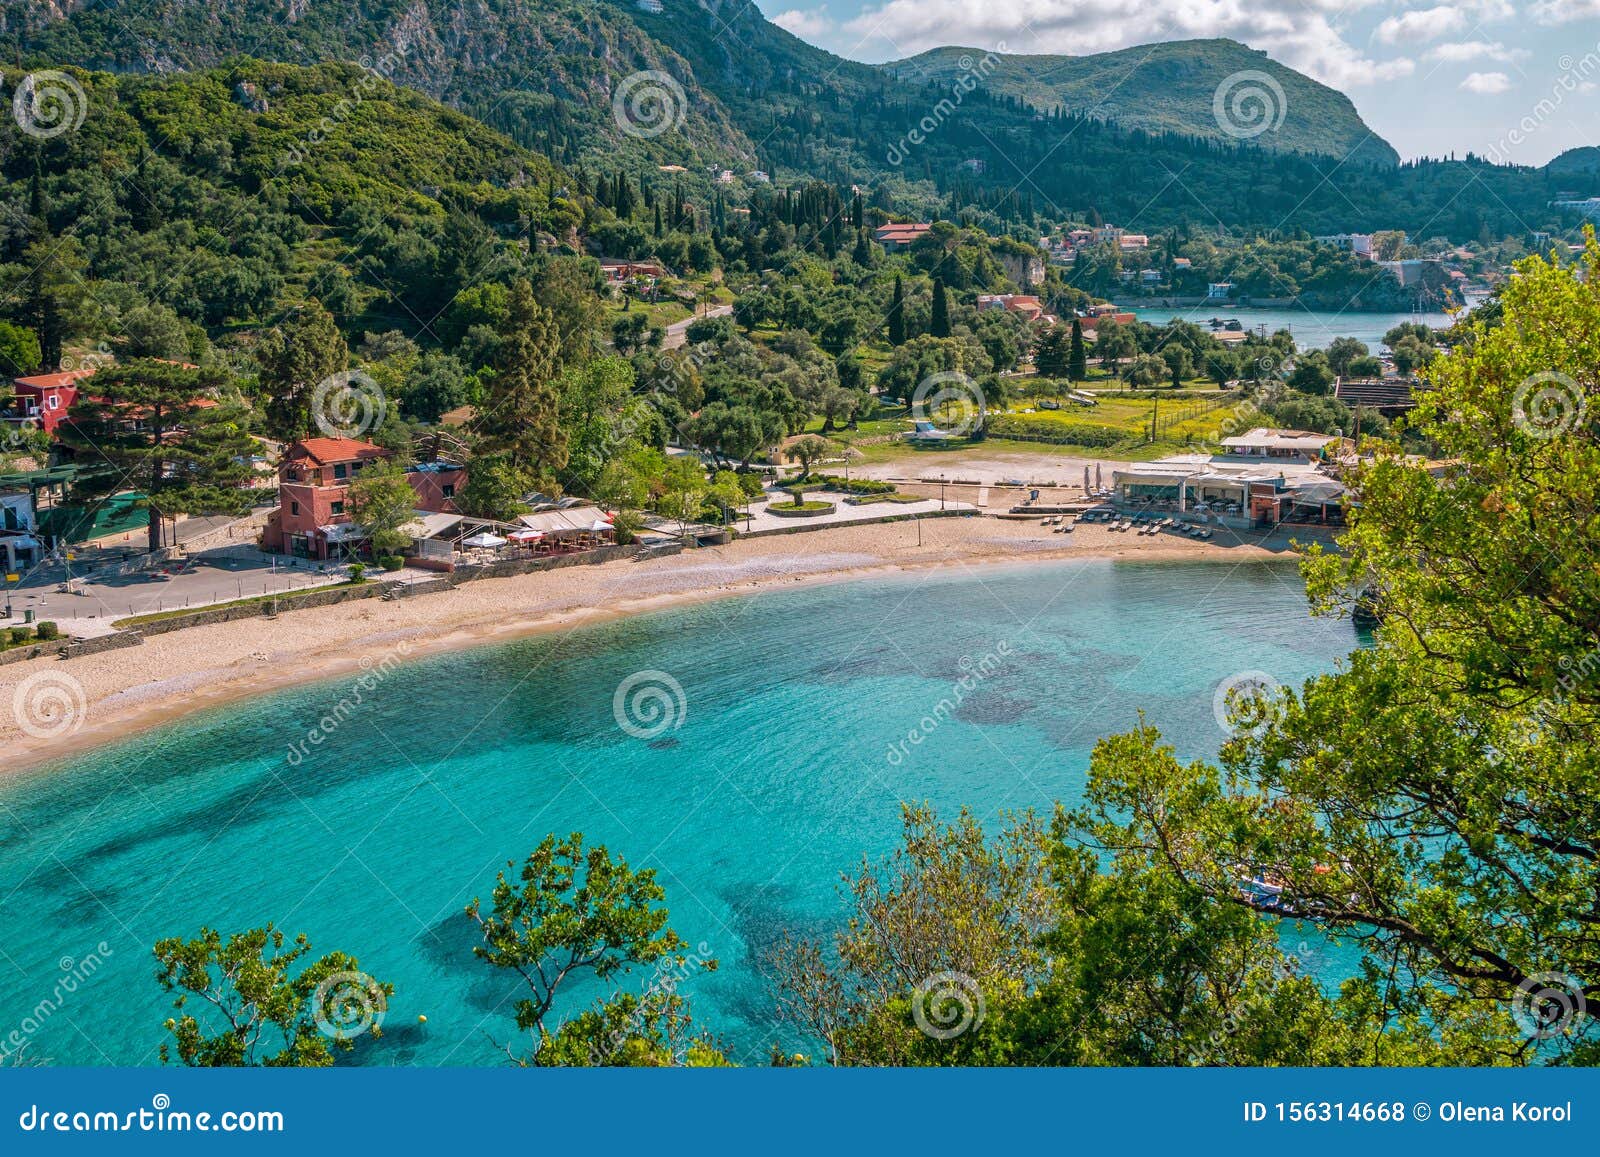 Beautiful Landscape With Sealagoon Mountains And Cliffs Beach And